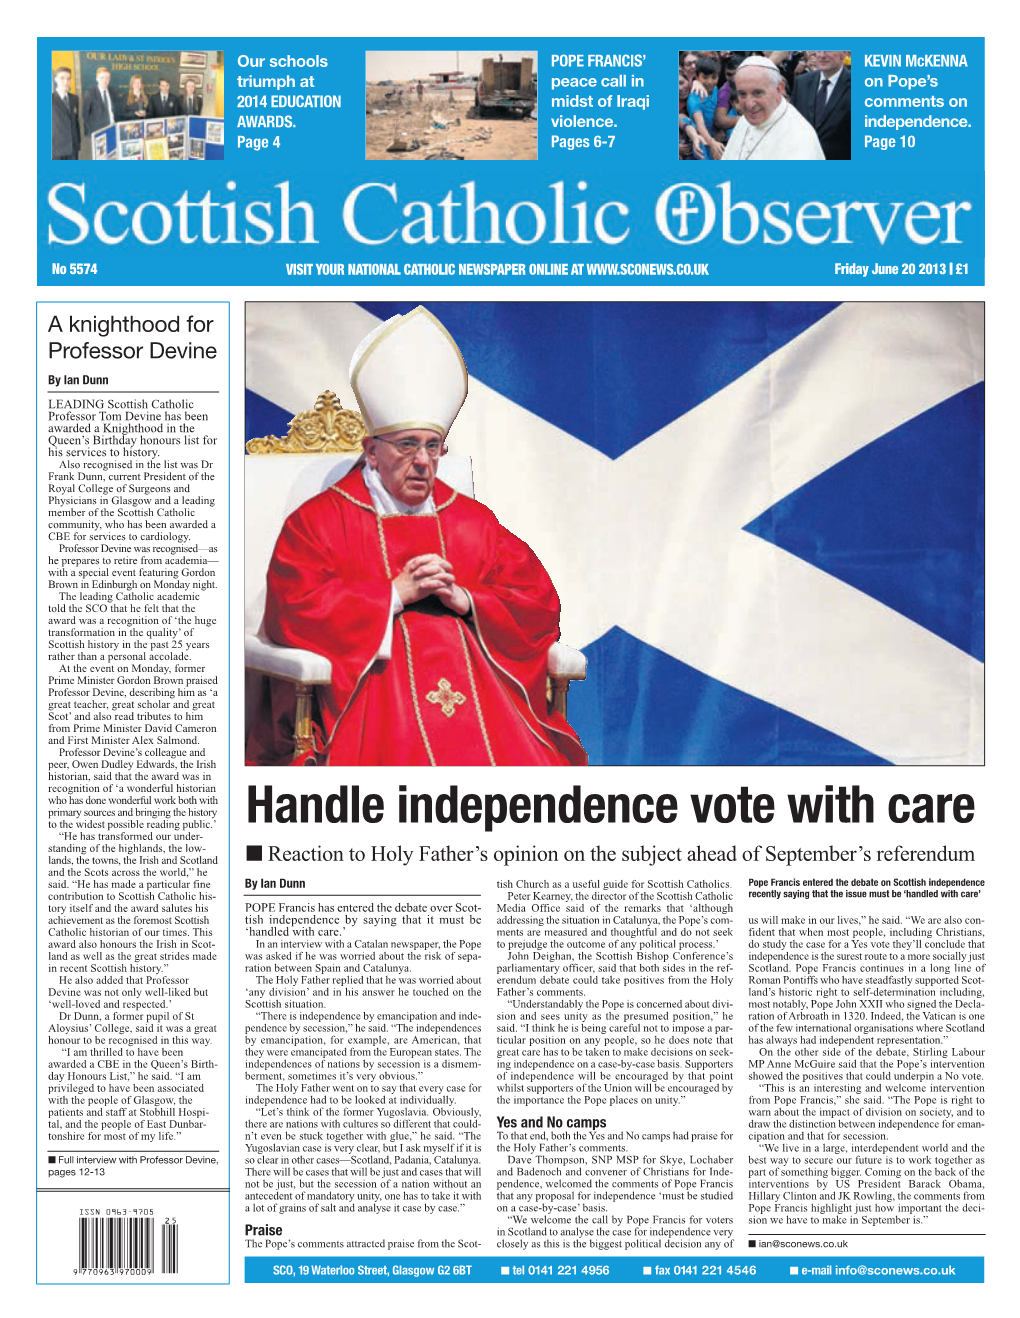 Handle Independence Vote with Care